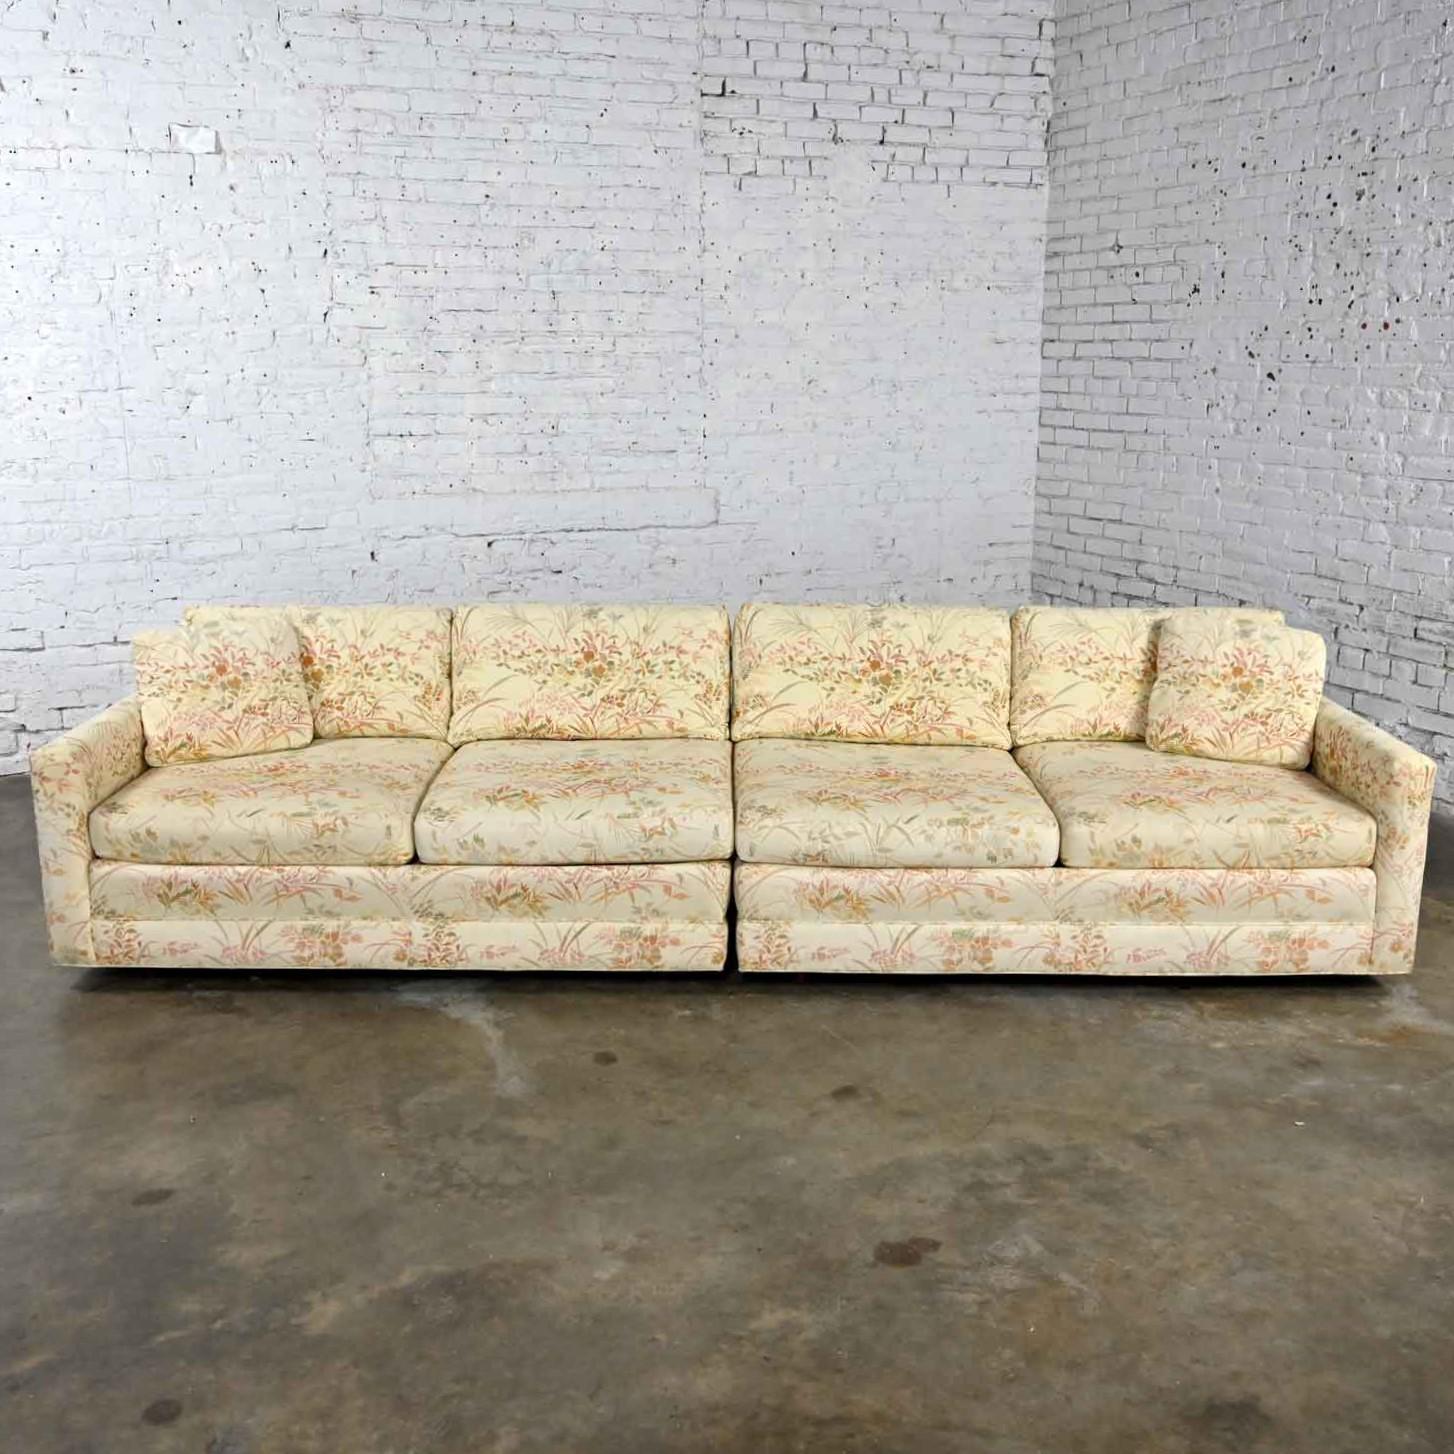 Unknown Vintage Mid-Century Modern 2 Piece Floral Sectional Sofa Style of Harvey Probber